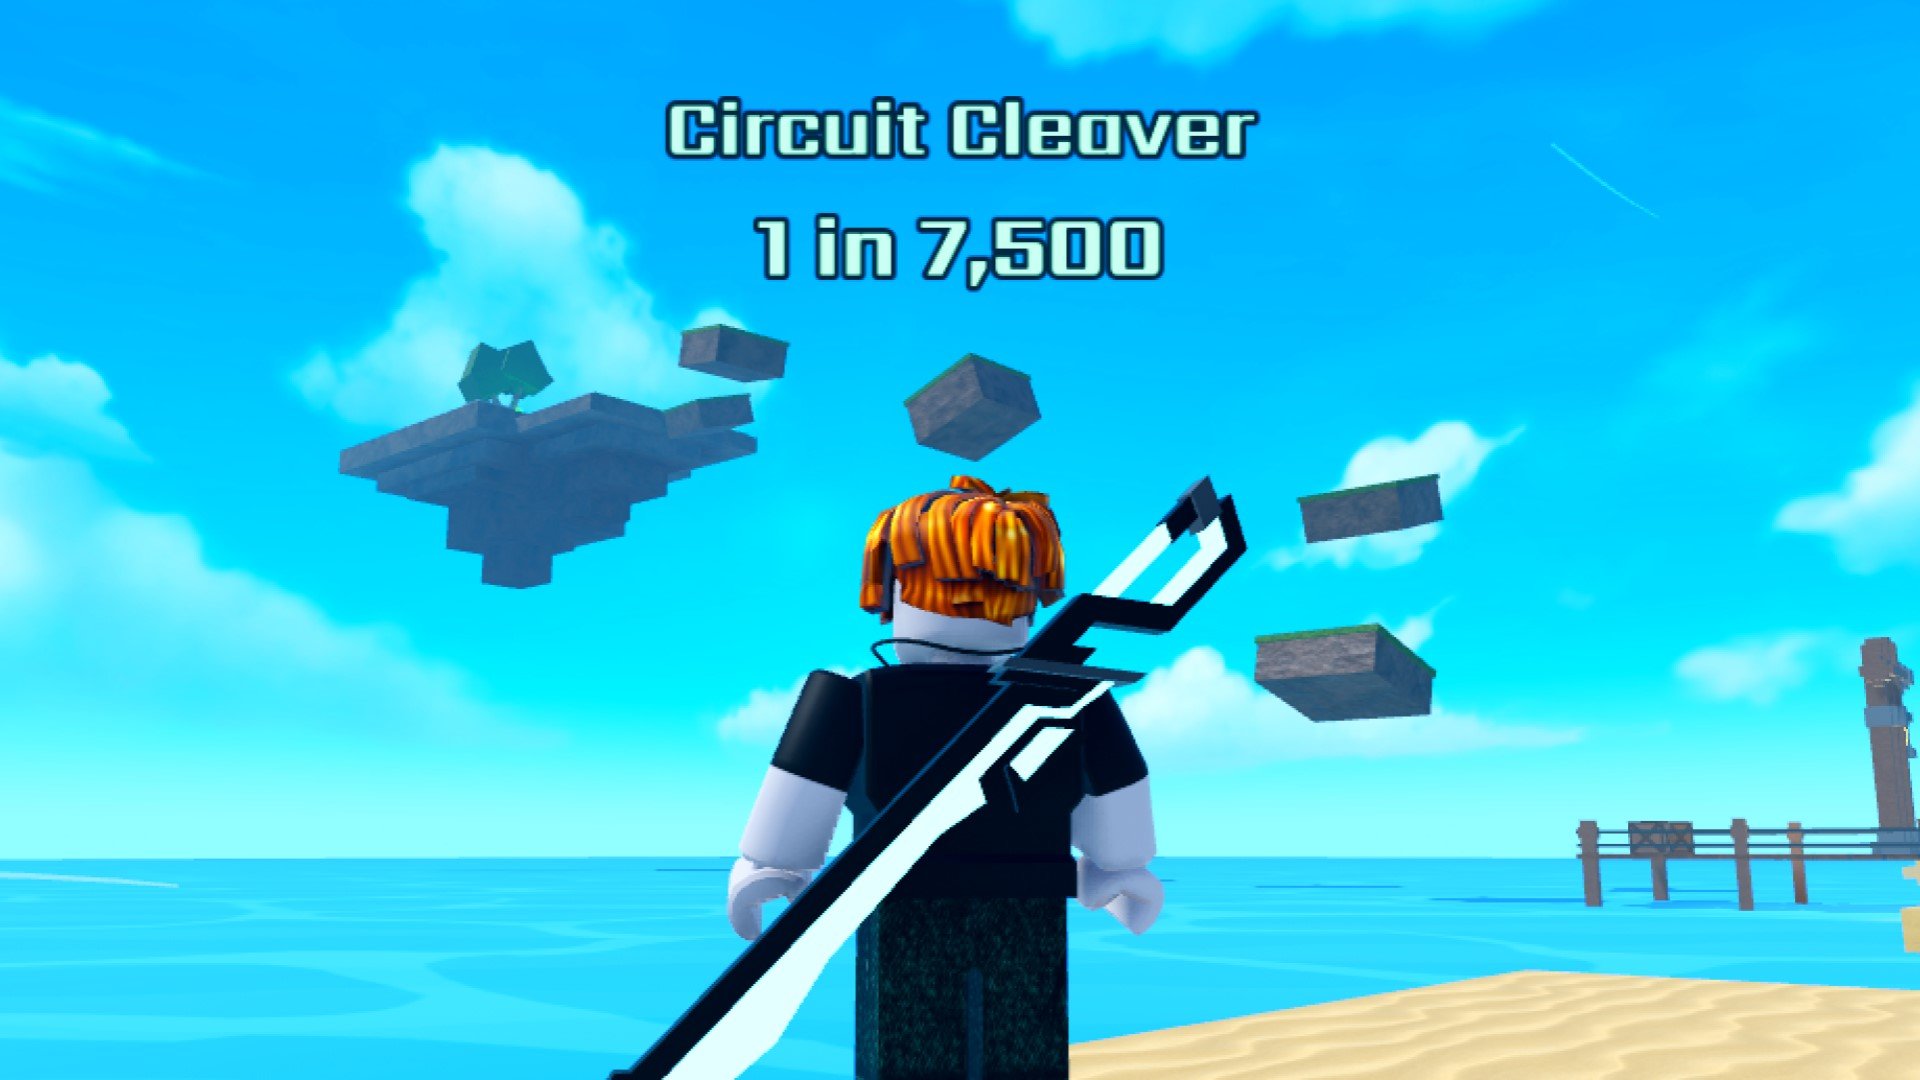 A character from Roblox game Blades of Chance looking out over the floating Parkour section in the game. They have the Circuit Cleaver Blade equipped.